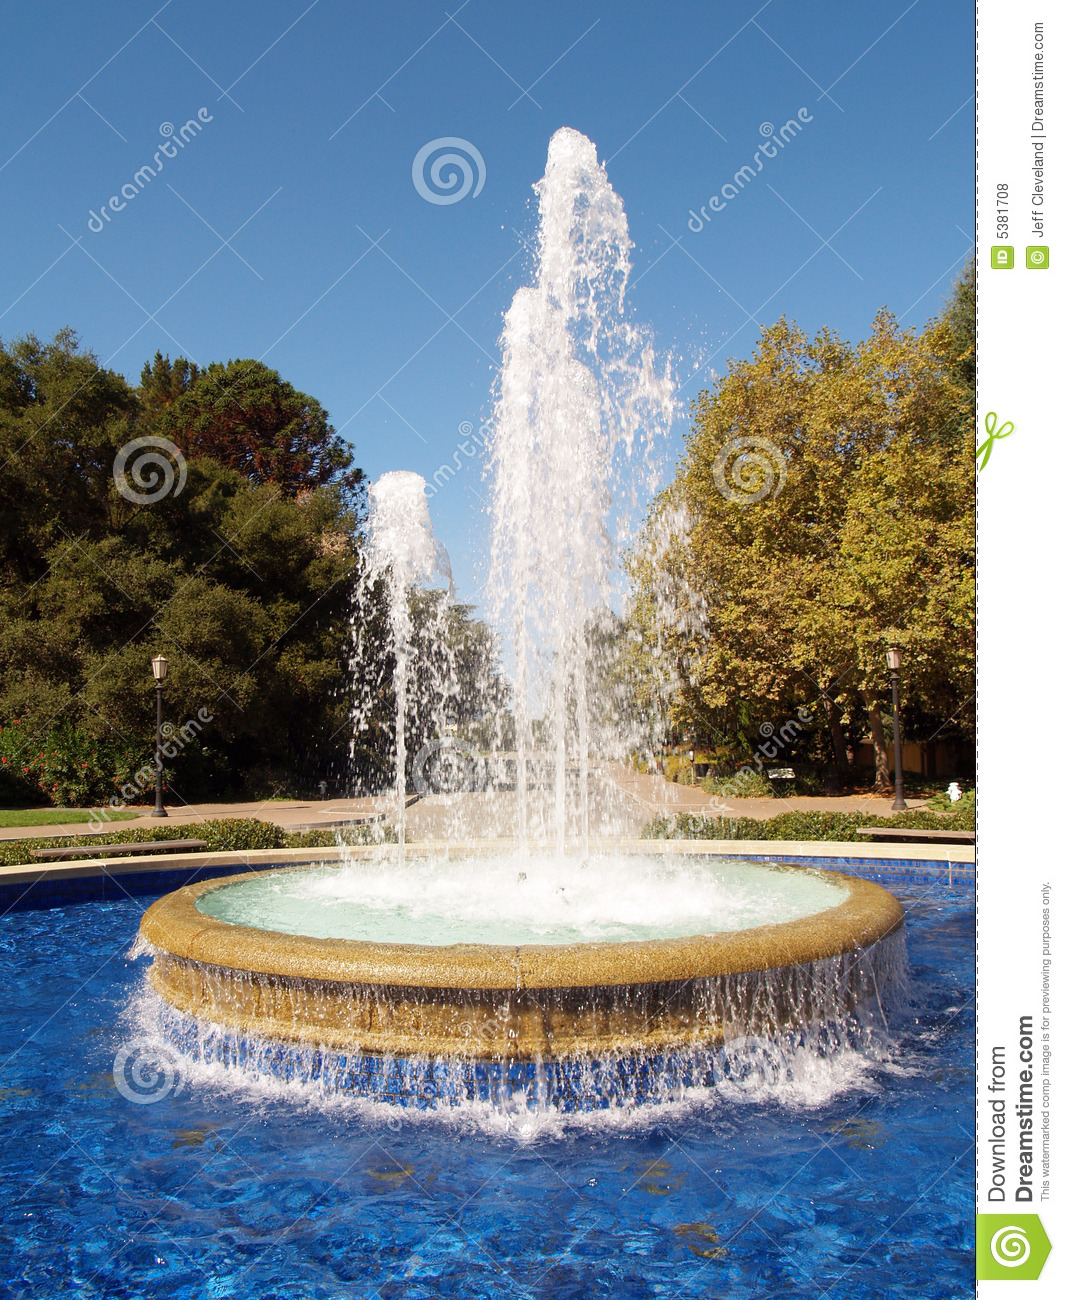 More Similar Stock Images Of   Fountain Spraying Up With Pool Of Water